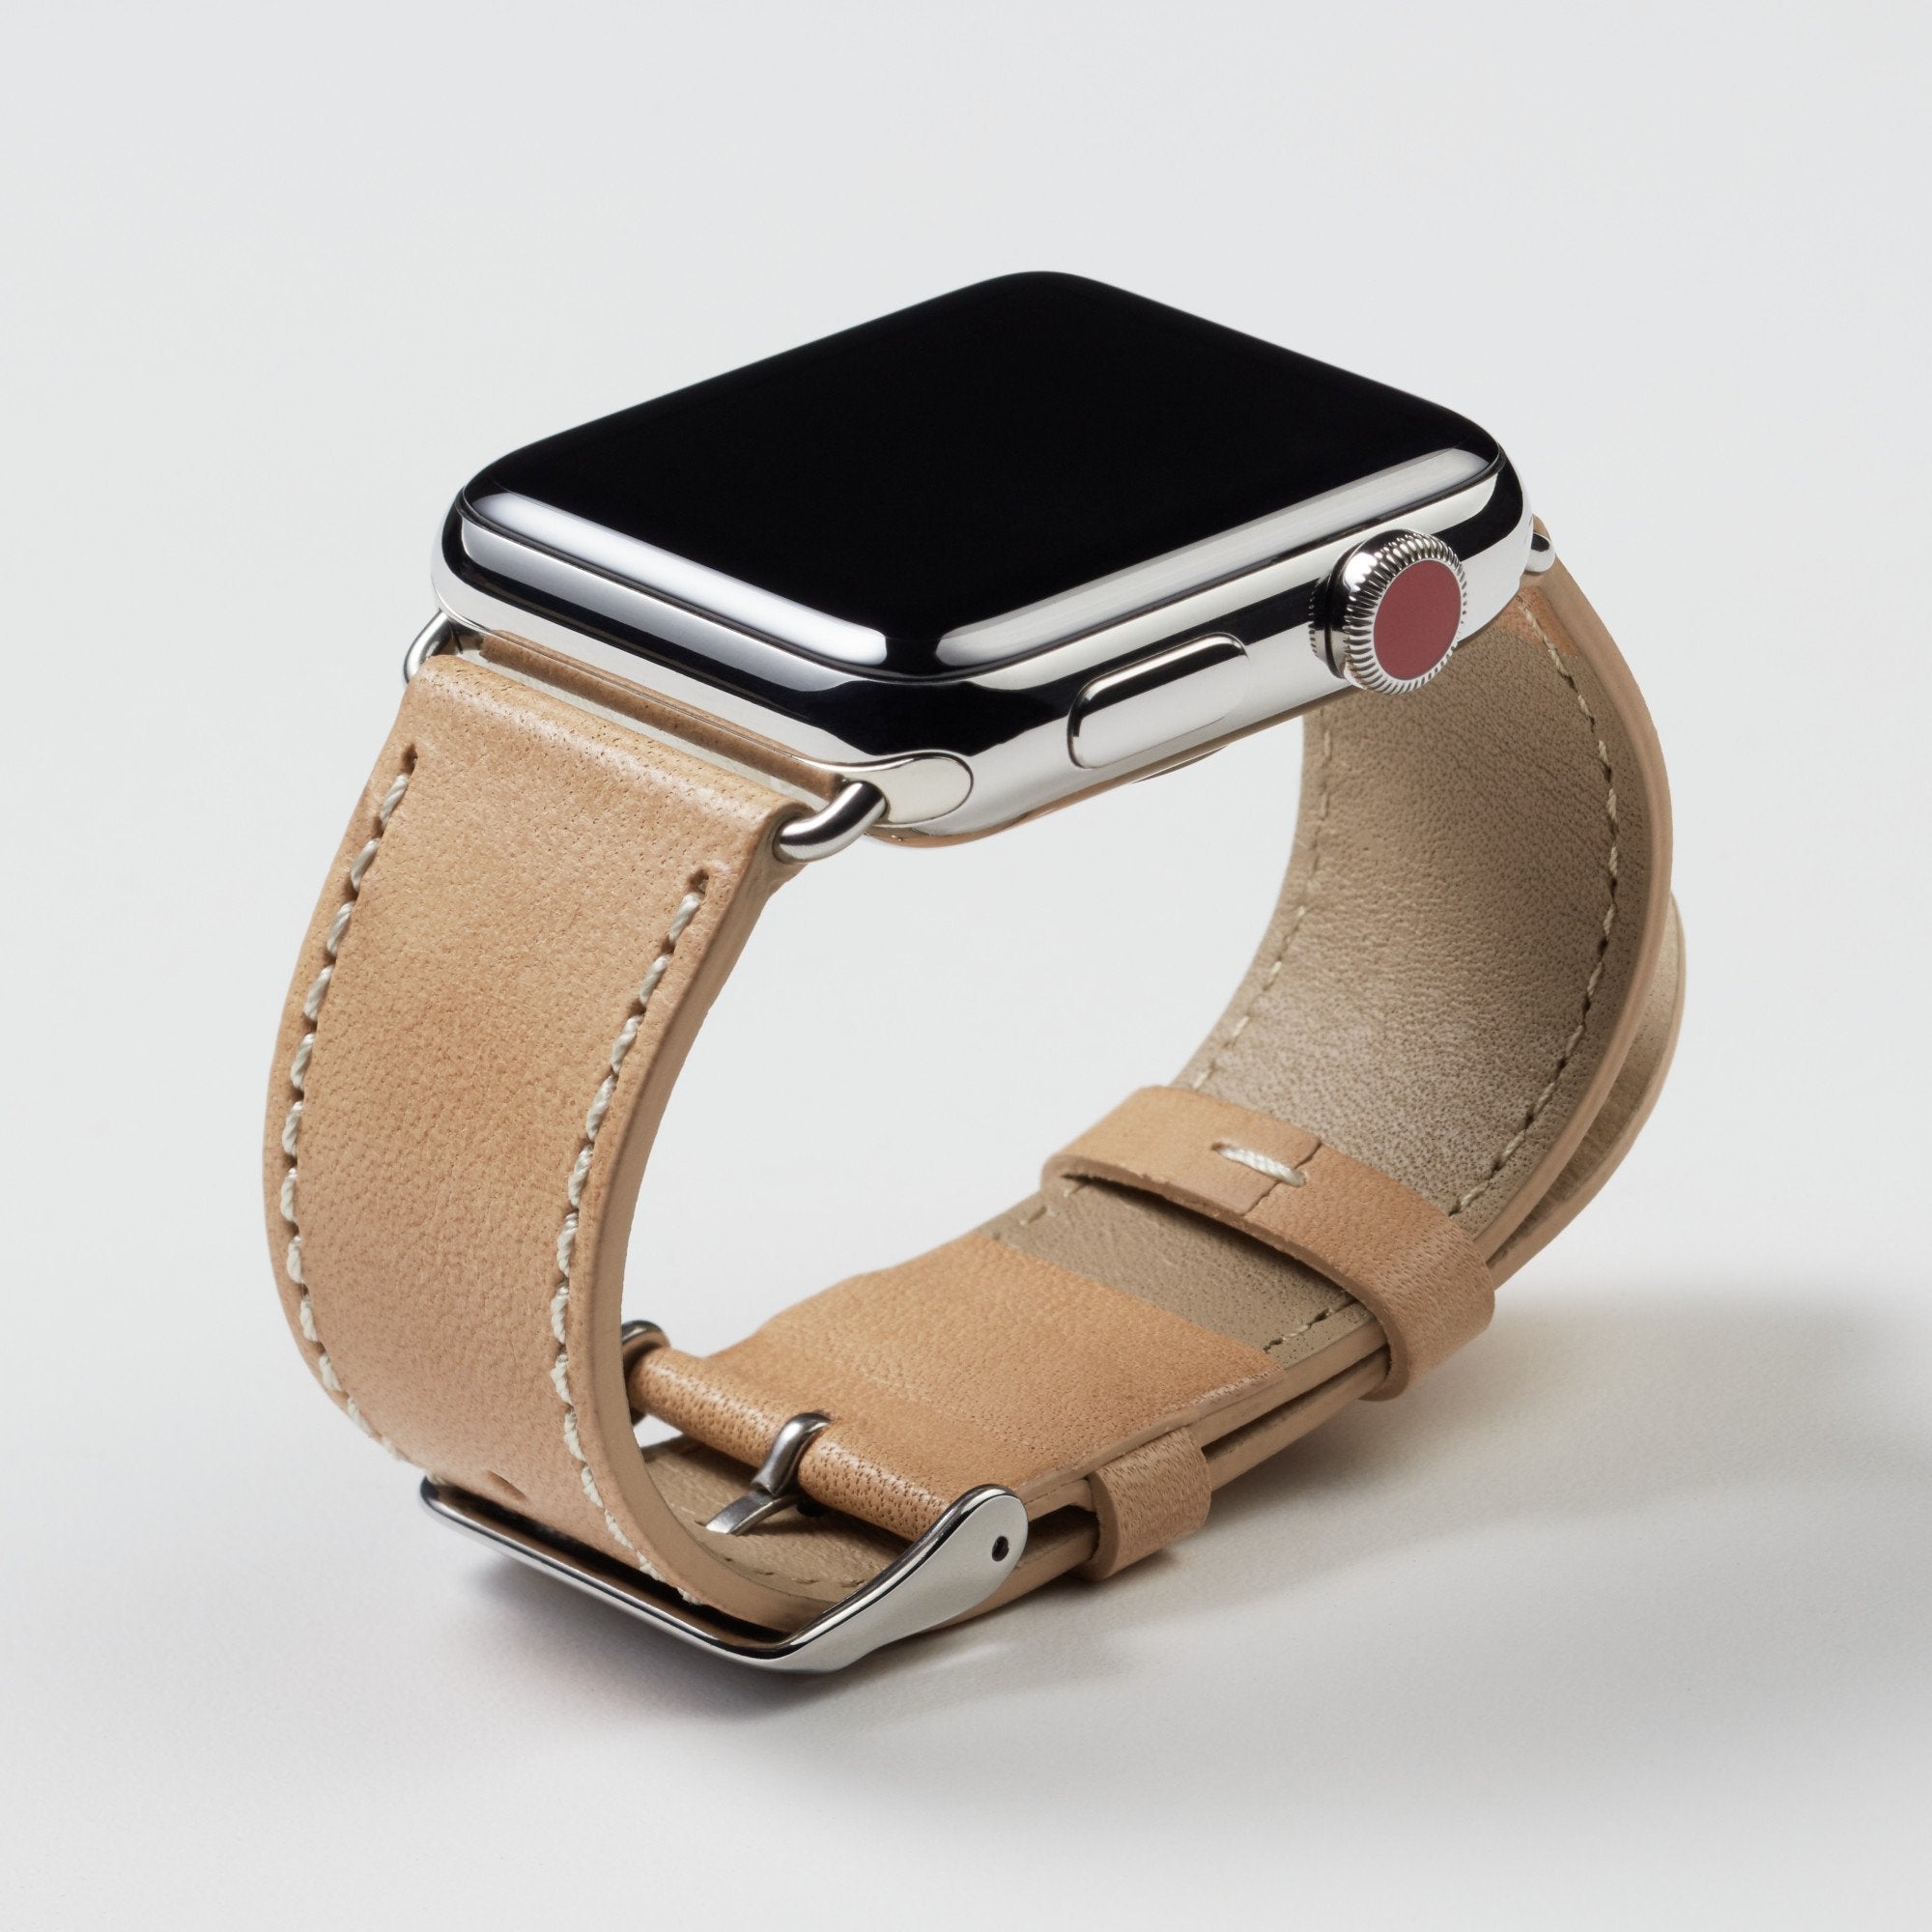 Pin and Buckle Vachetta Leather Apple Watch Band